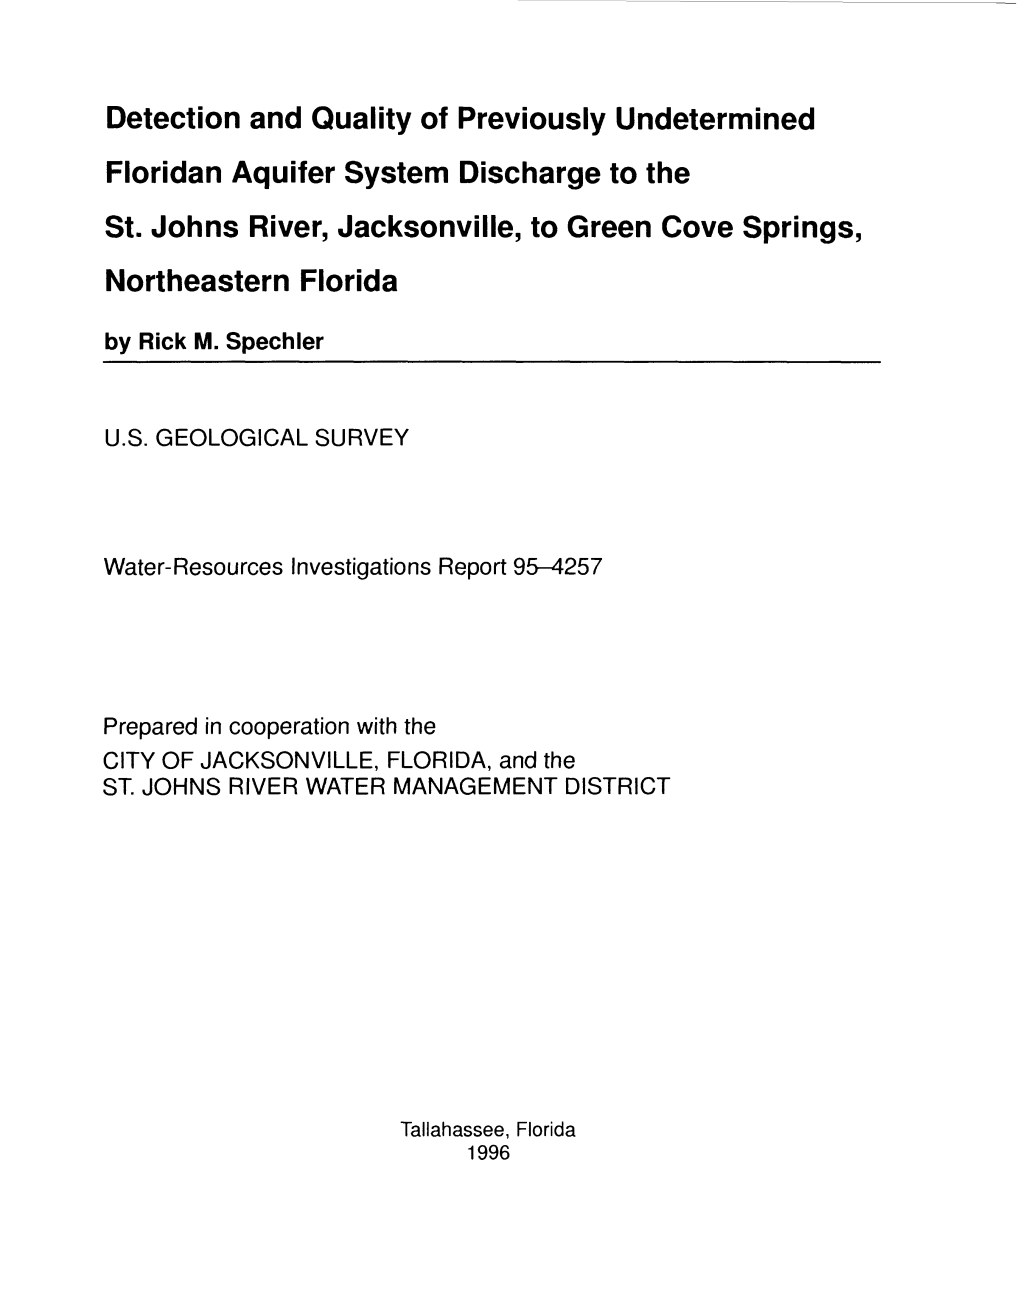 Detection and Quality of Previously Undetermined Floridan Aquifer System Discharge to the St